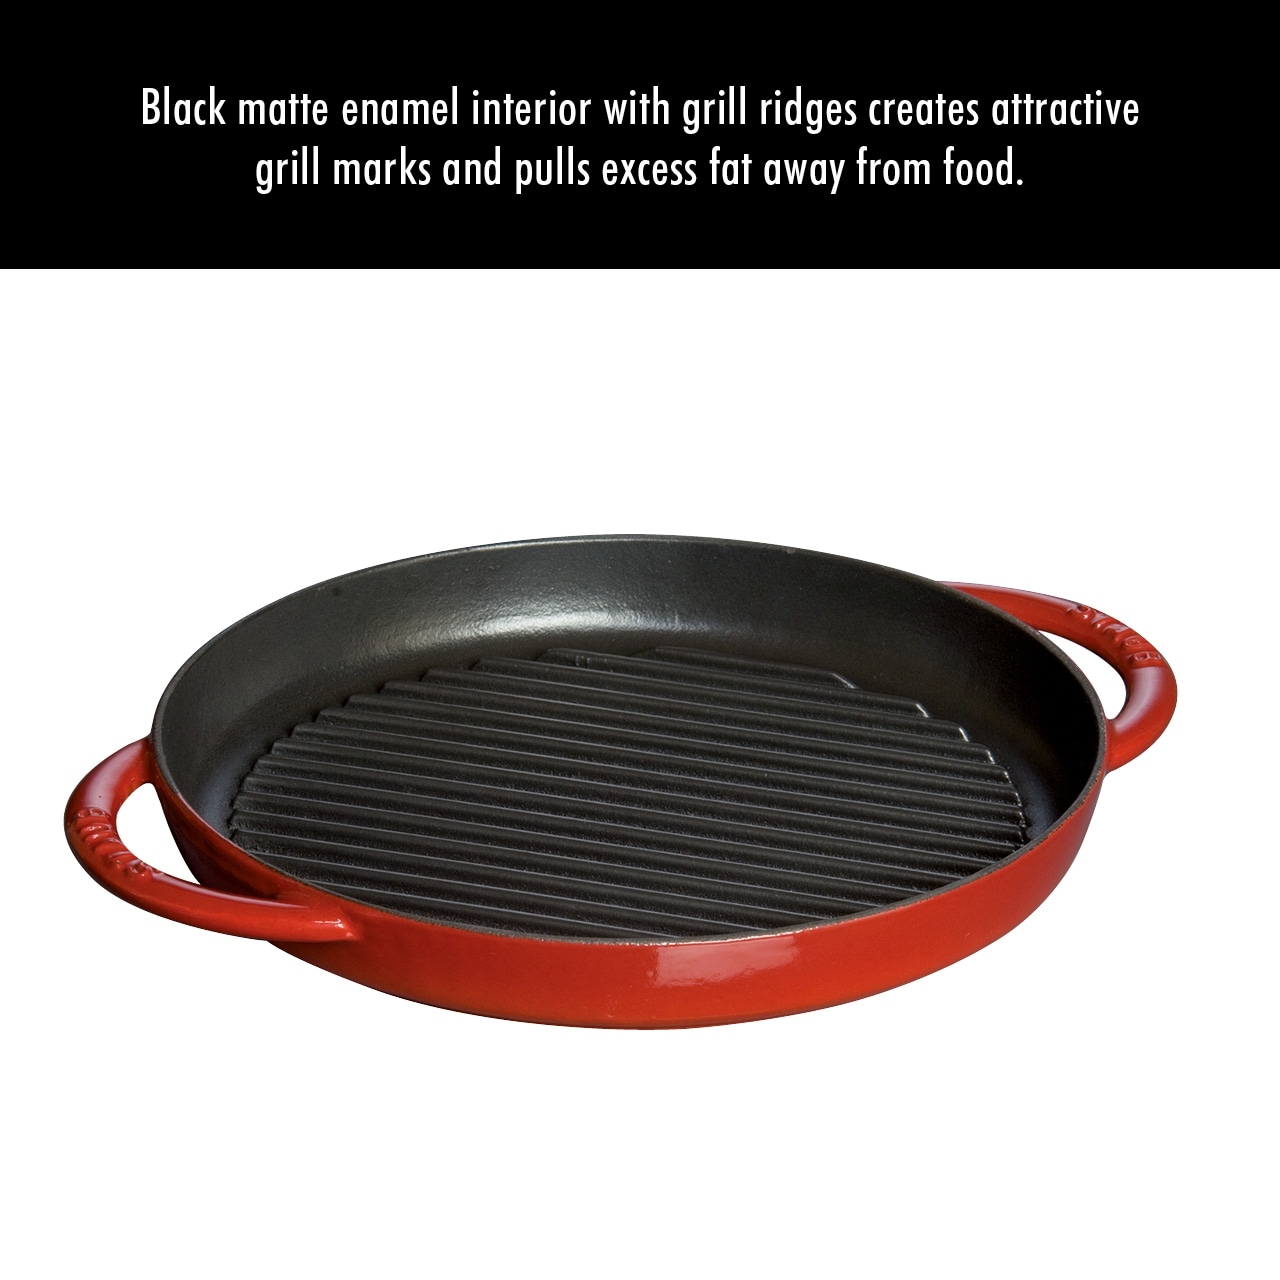 STAUB Cast Iron 10-inch Pure Grill - Bed Bath & Beyond - 14291542